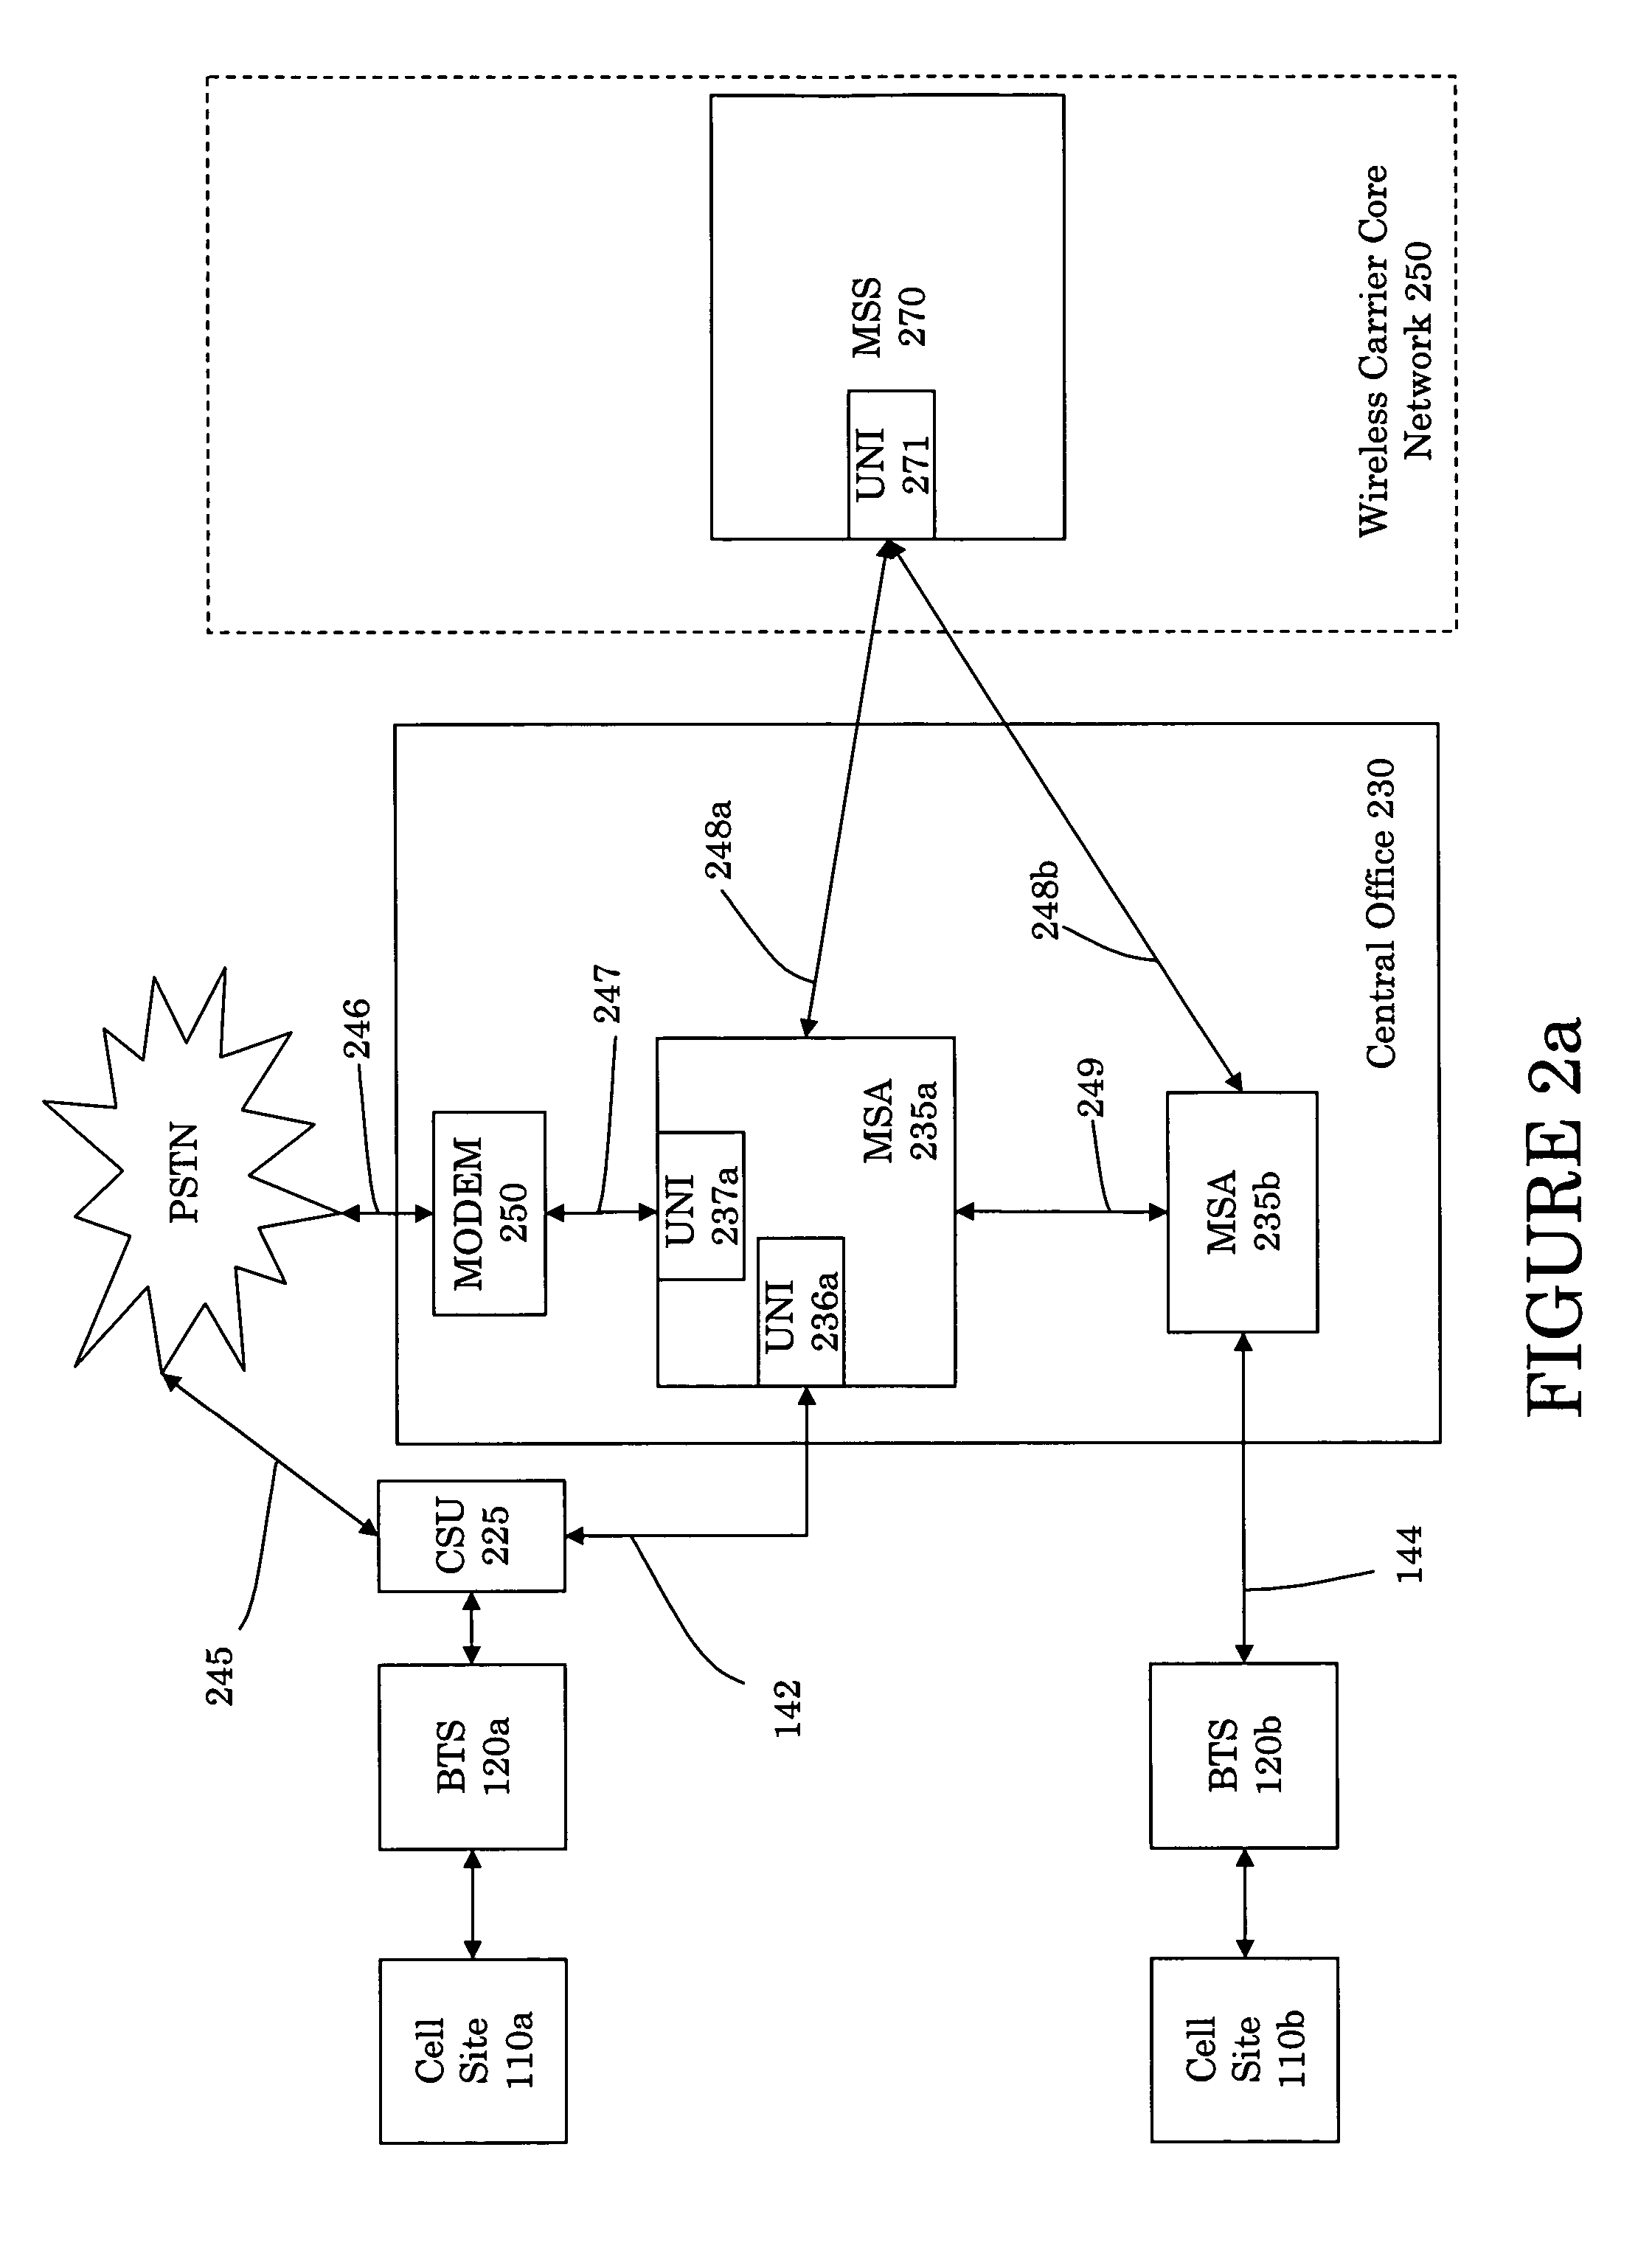 Fault tolerant wireless communication systems and methods